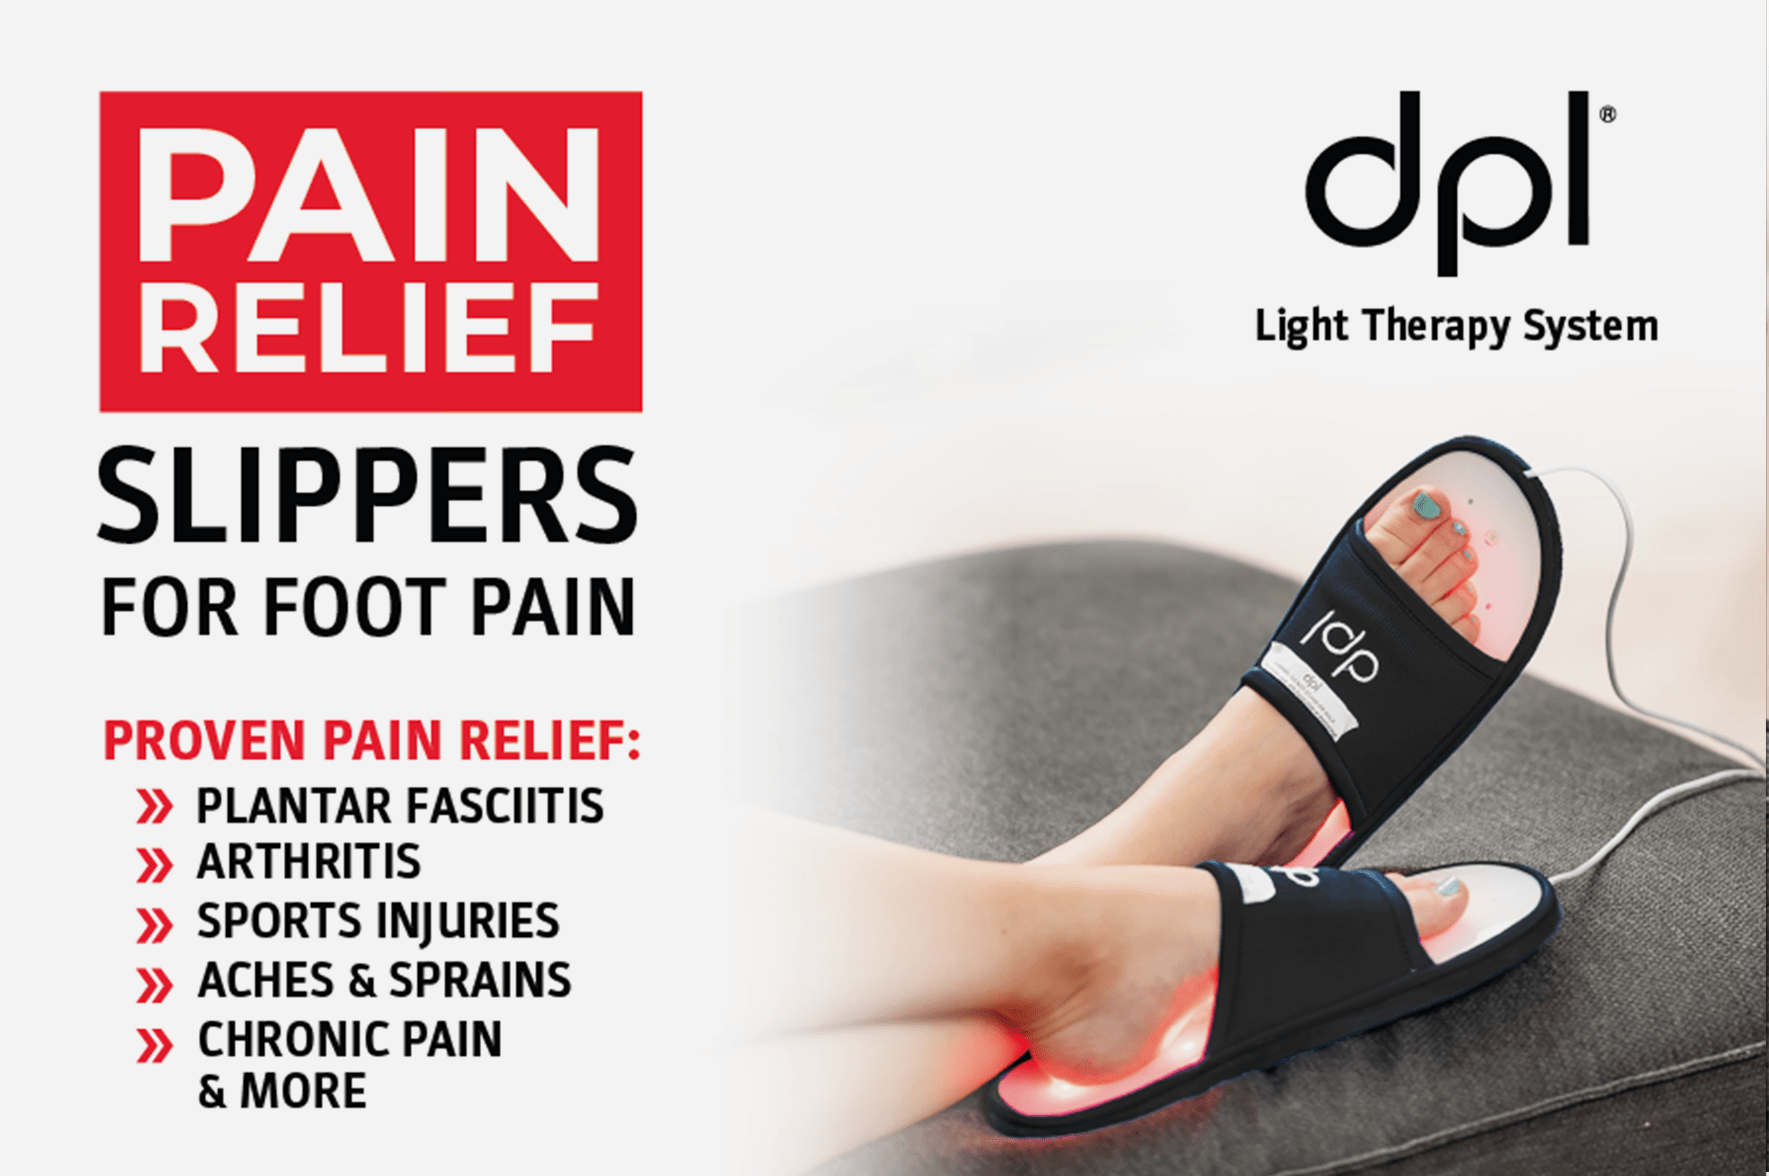 DPL Red Light Therapy Slippers for Foot Pain Relief - Carex Health Brands